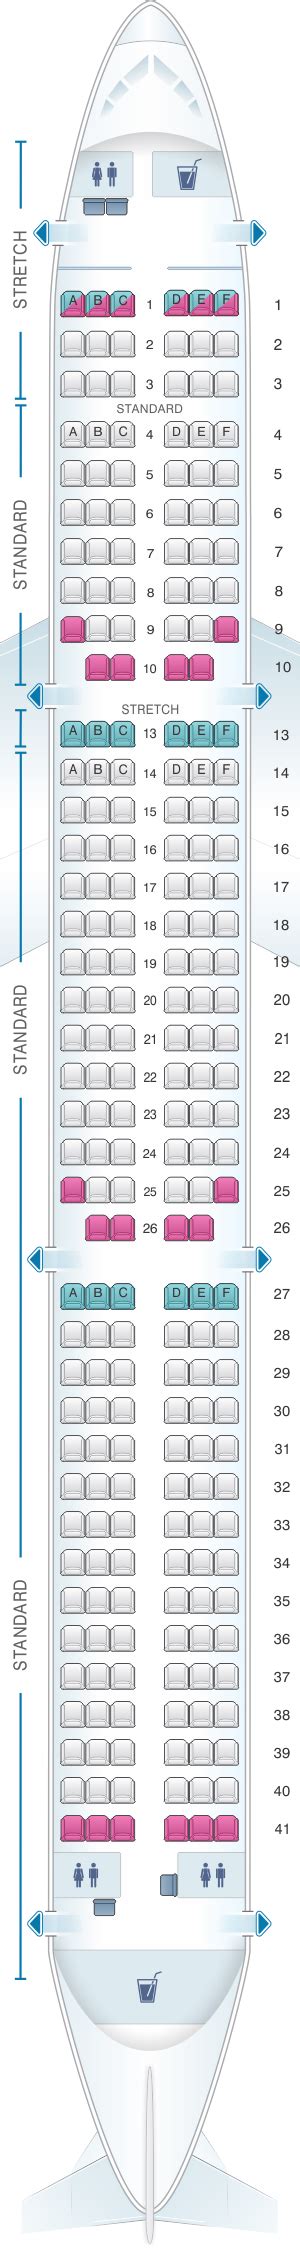 Frontier airlines plane seating chart. This aircraft features Frontier's Stretch seating which are the first three rows … 